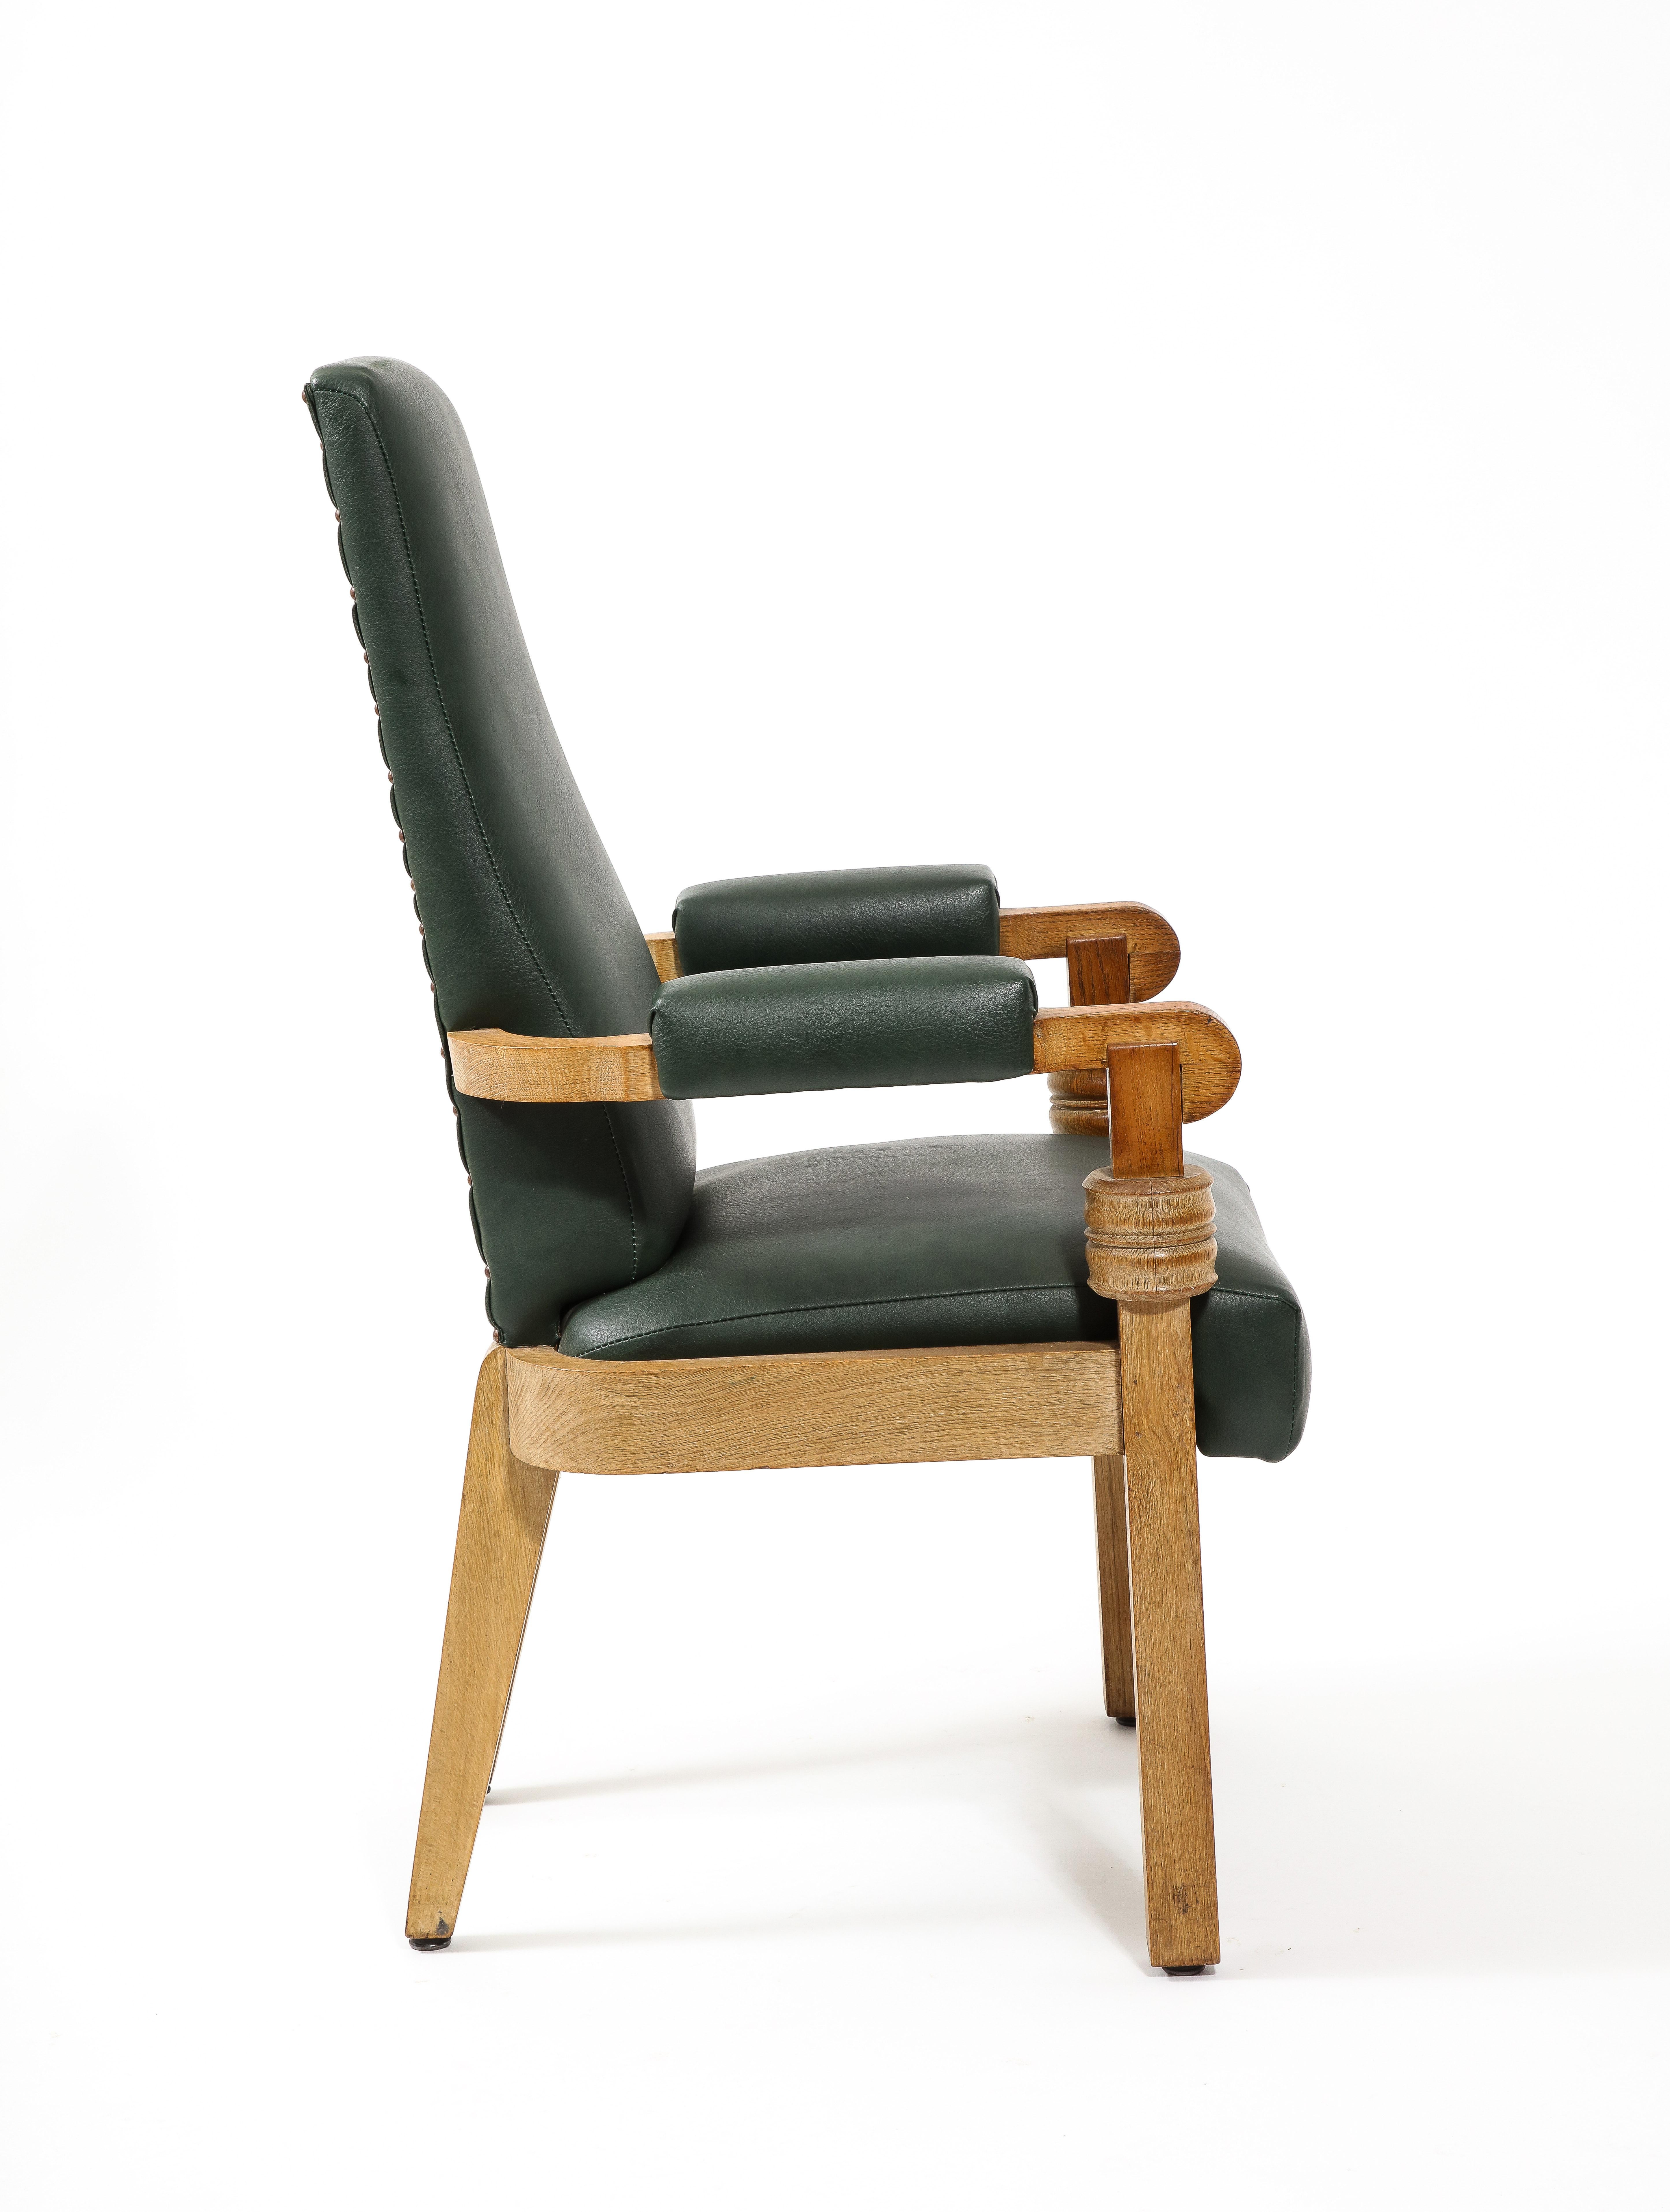 Forest Green Charles Dudouyt Captain Chair, France 1950s For Sale 3